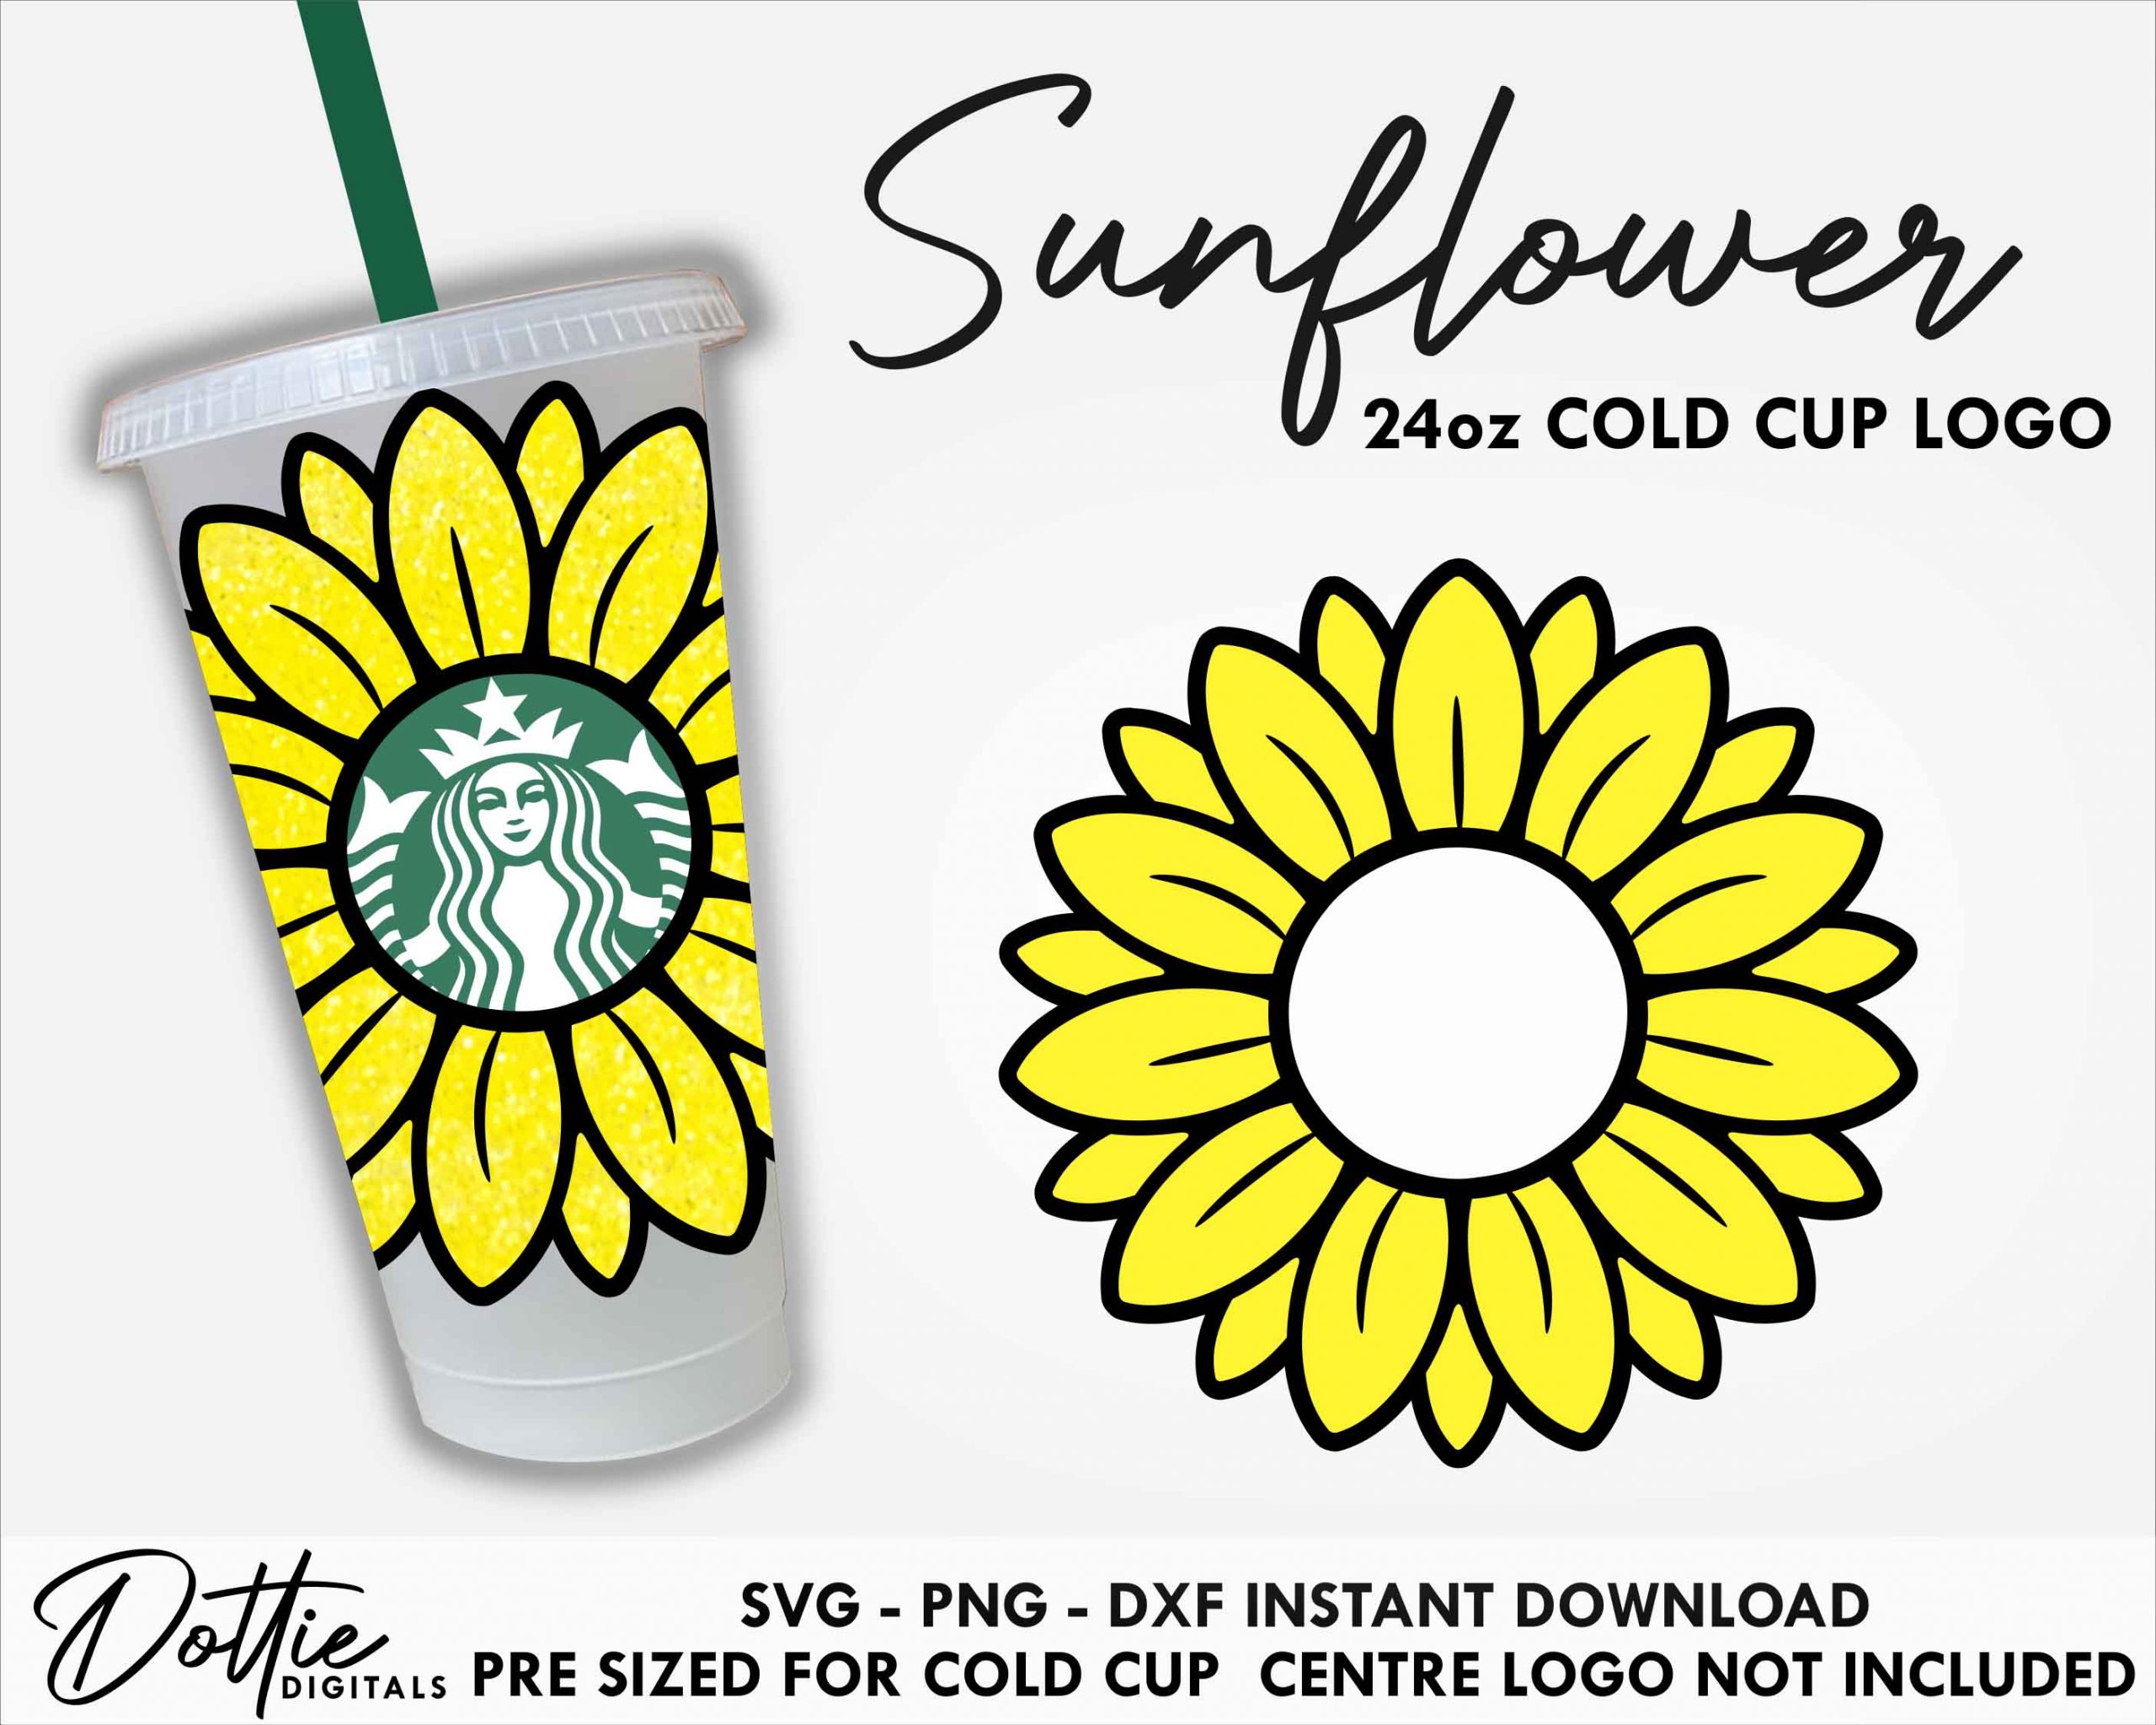 Dottie Digitals - Scorpio Starbucks Cold Cup SVG PNG DXF Scorpion Zodiac  Star Sign Cutting File 24oz Venti Cup Instant Digital Constellations  Astrology